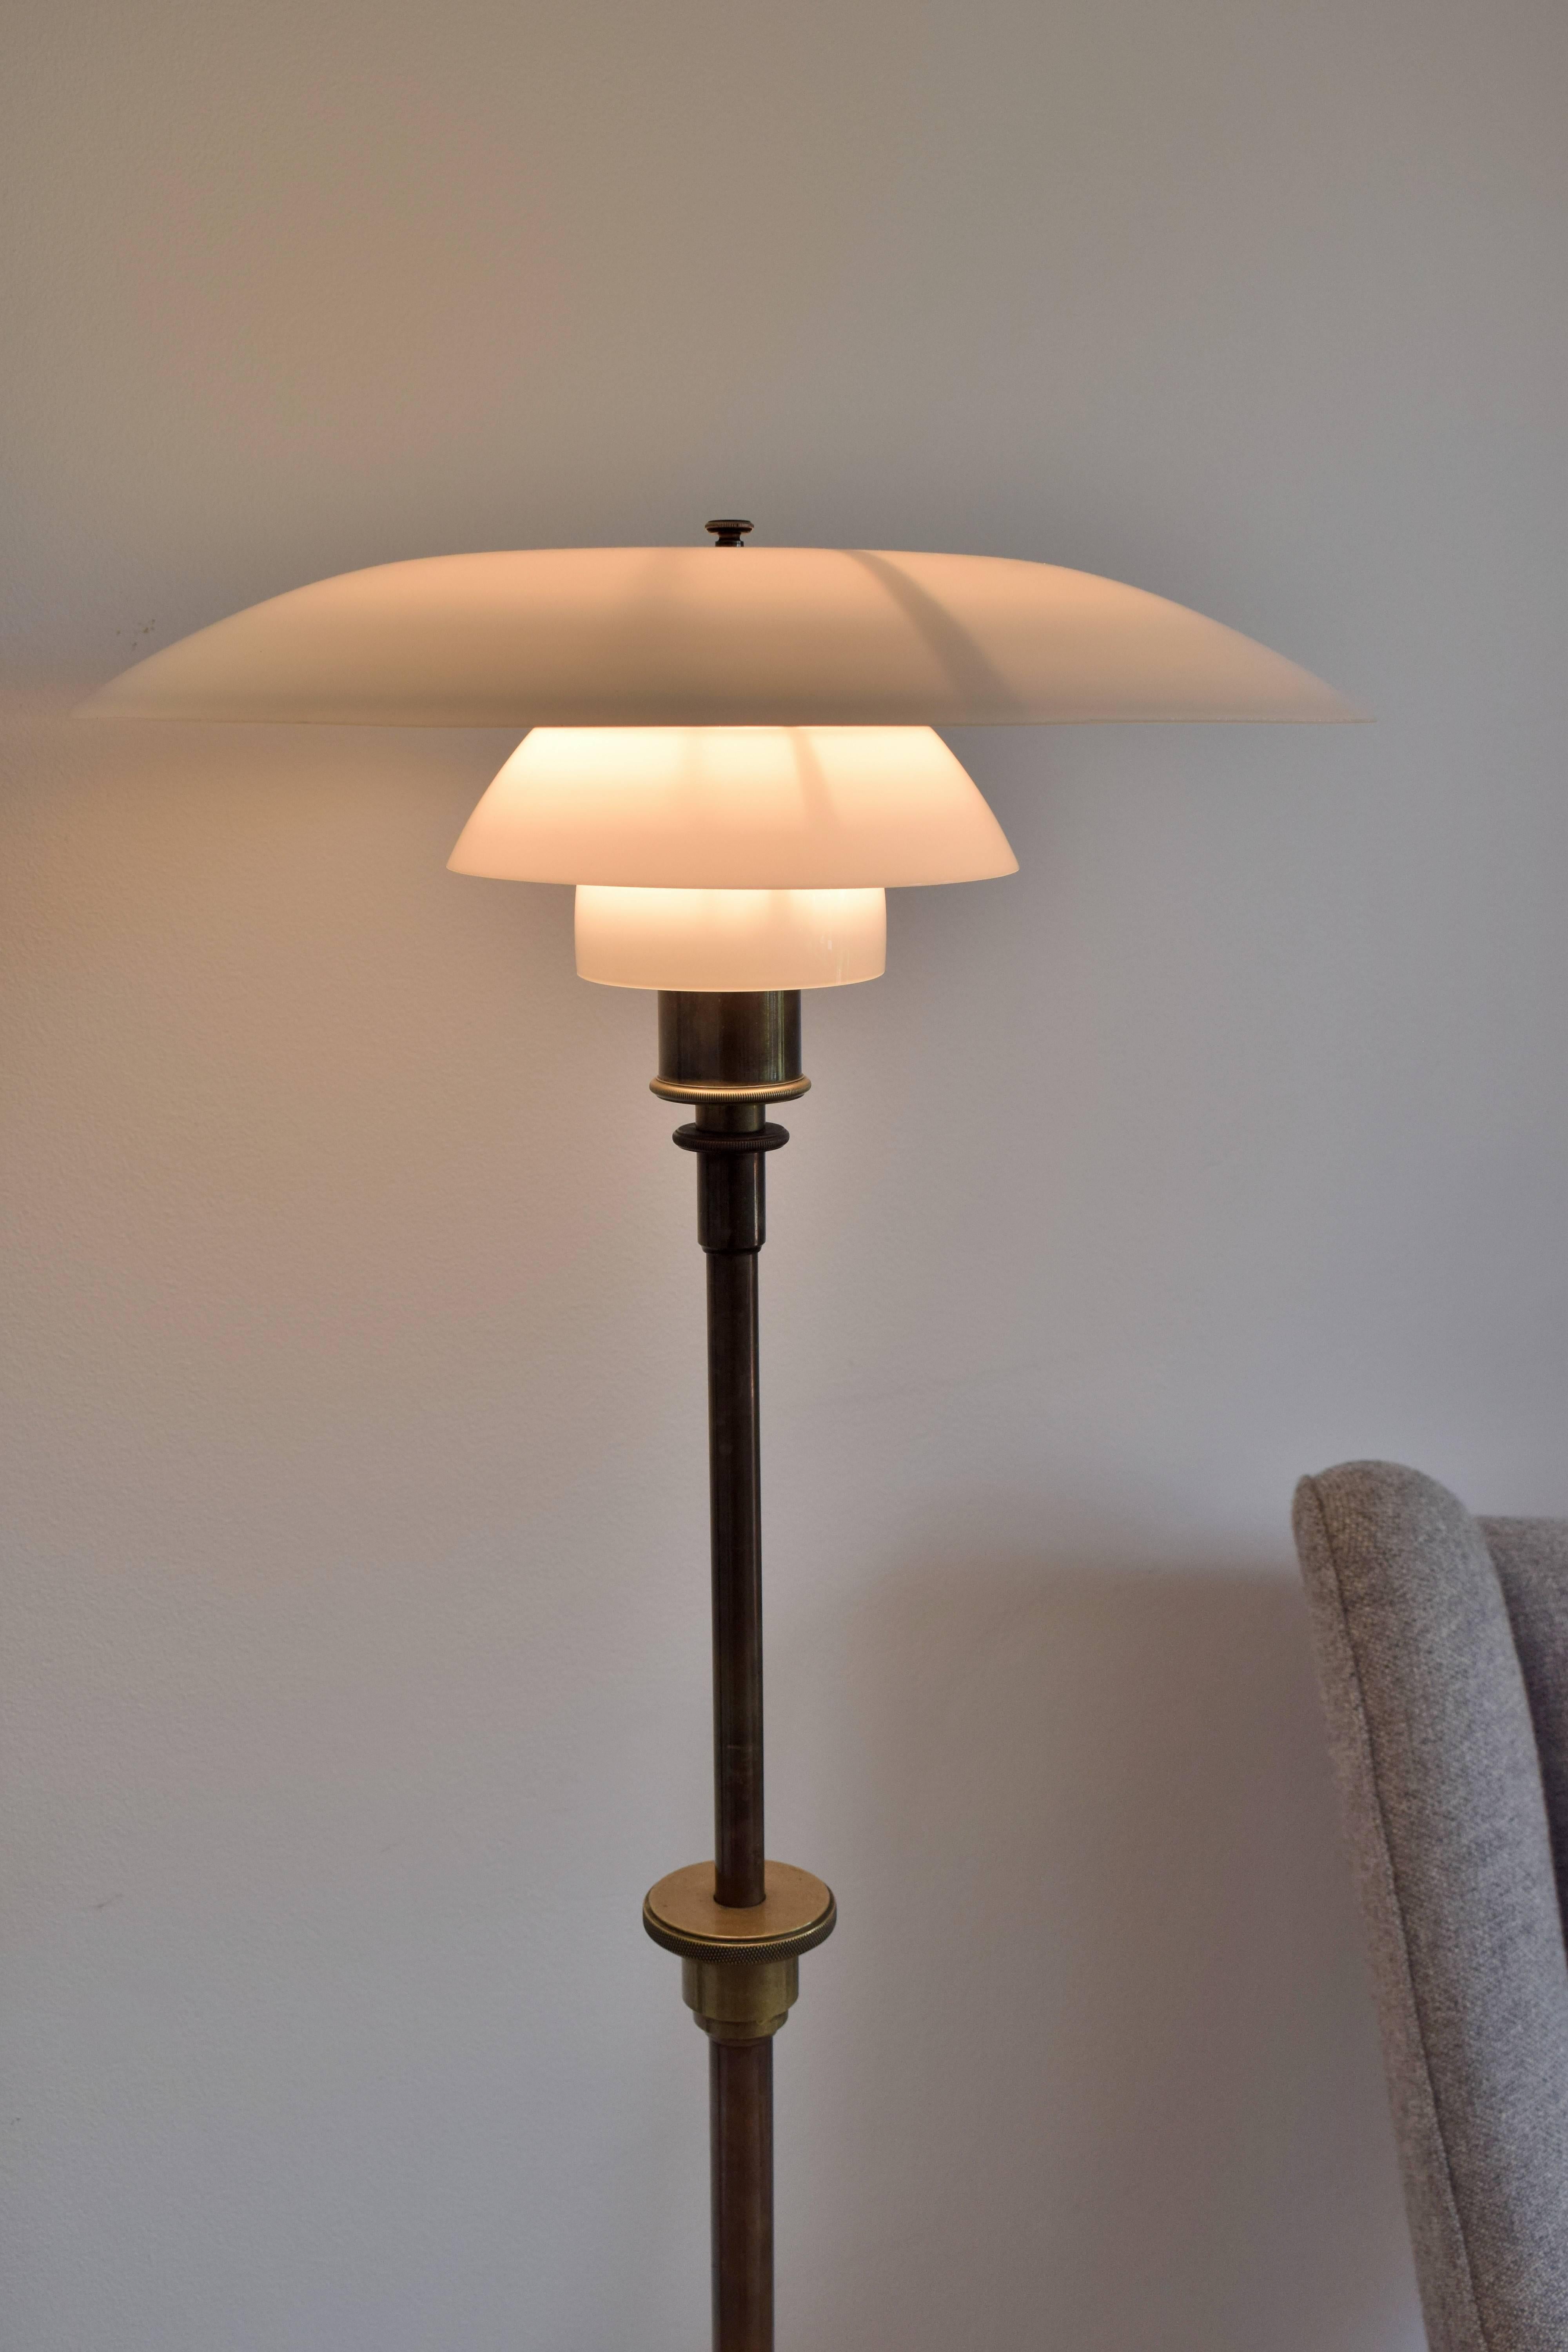 PH-5/3" rare floor lamp with opal glass shades, patinated brass stand. This example manufactured 1930 by Louis Poulsen.

Height adjustable 105 - 170 cm

Very rare examples, which is rarely seen on the market.
 